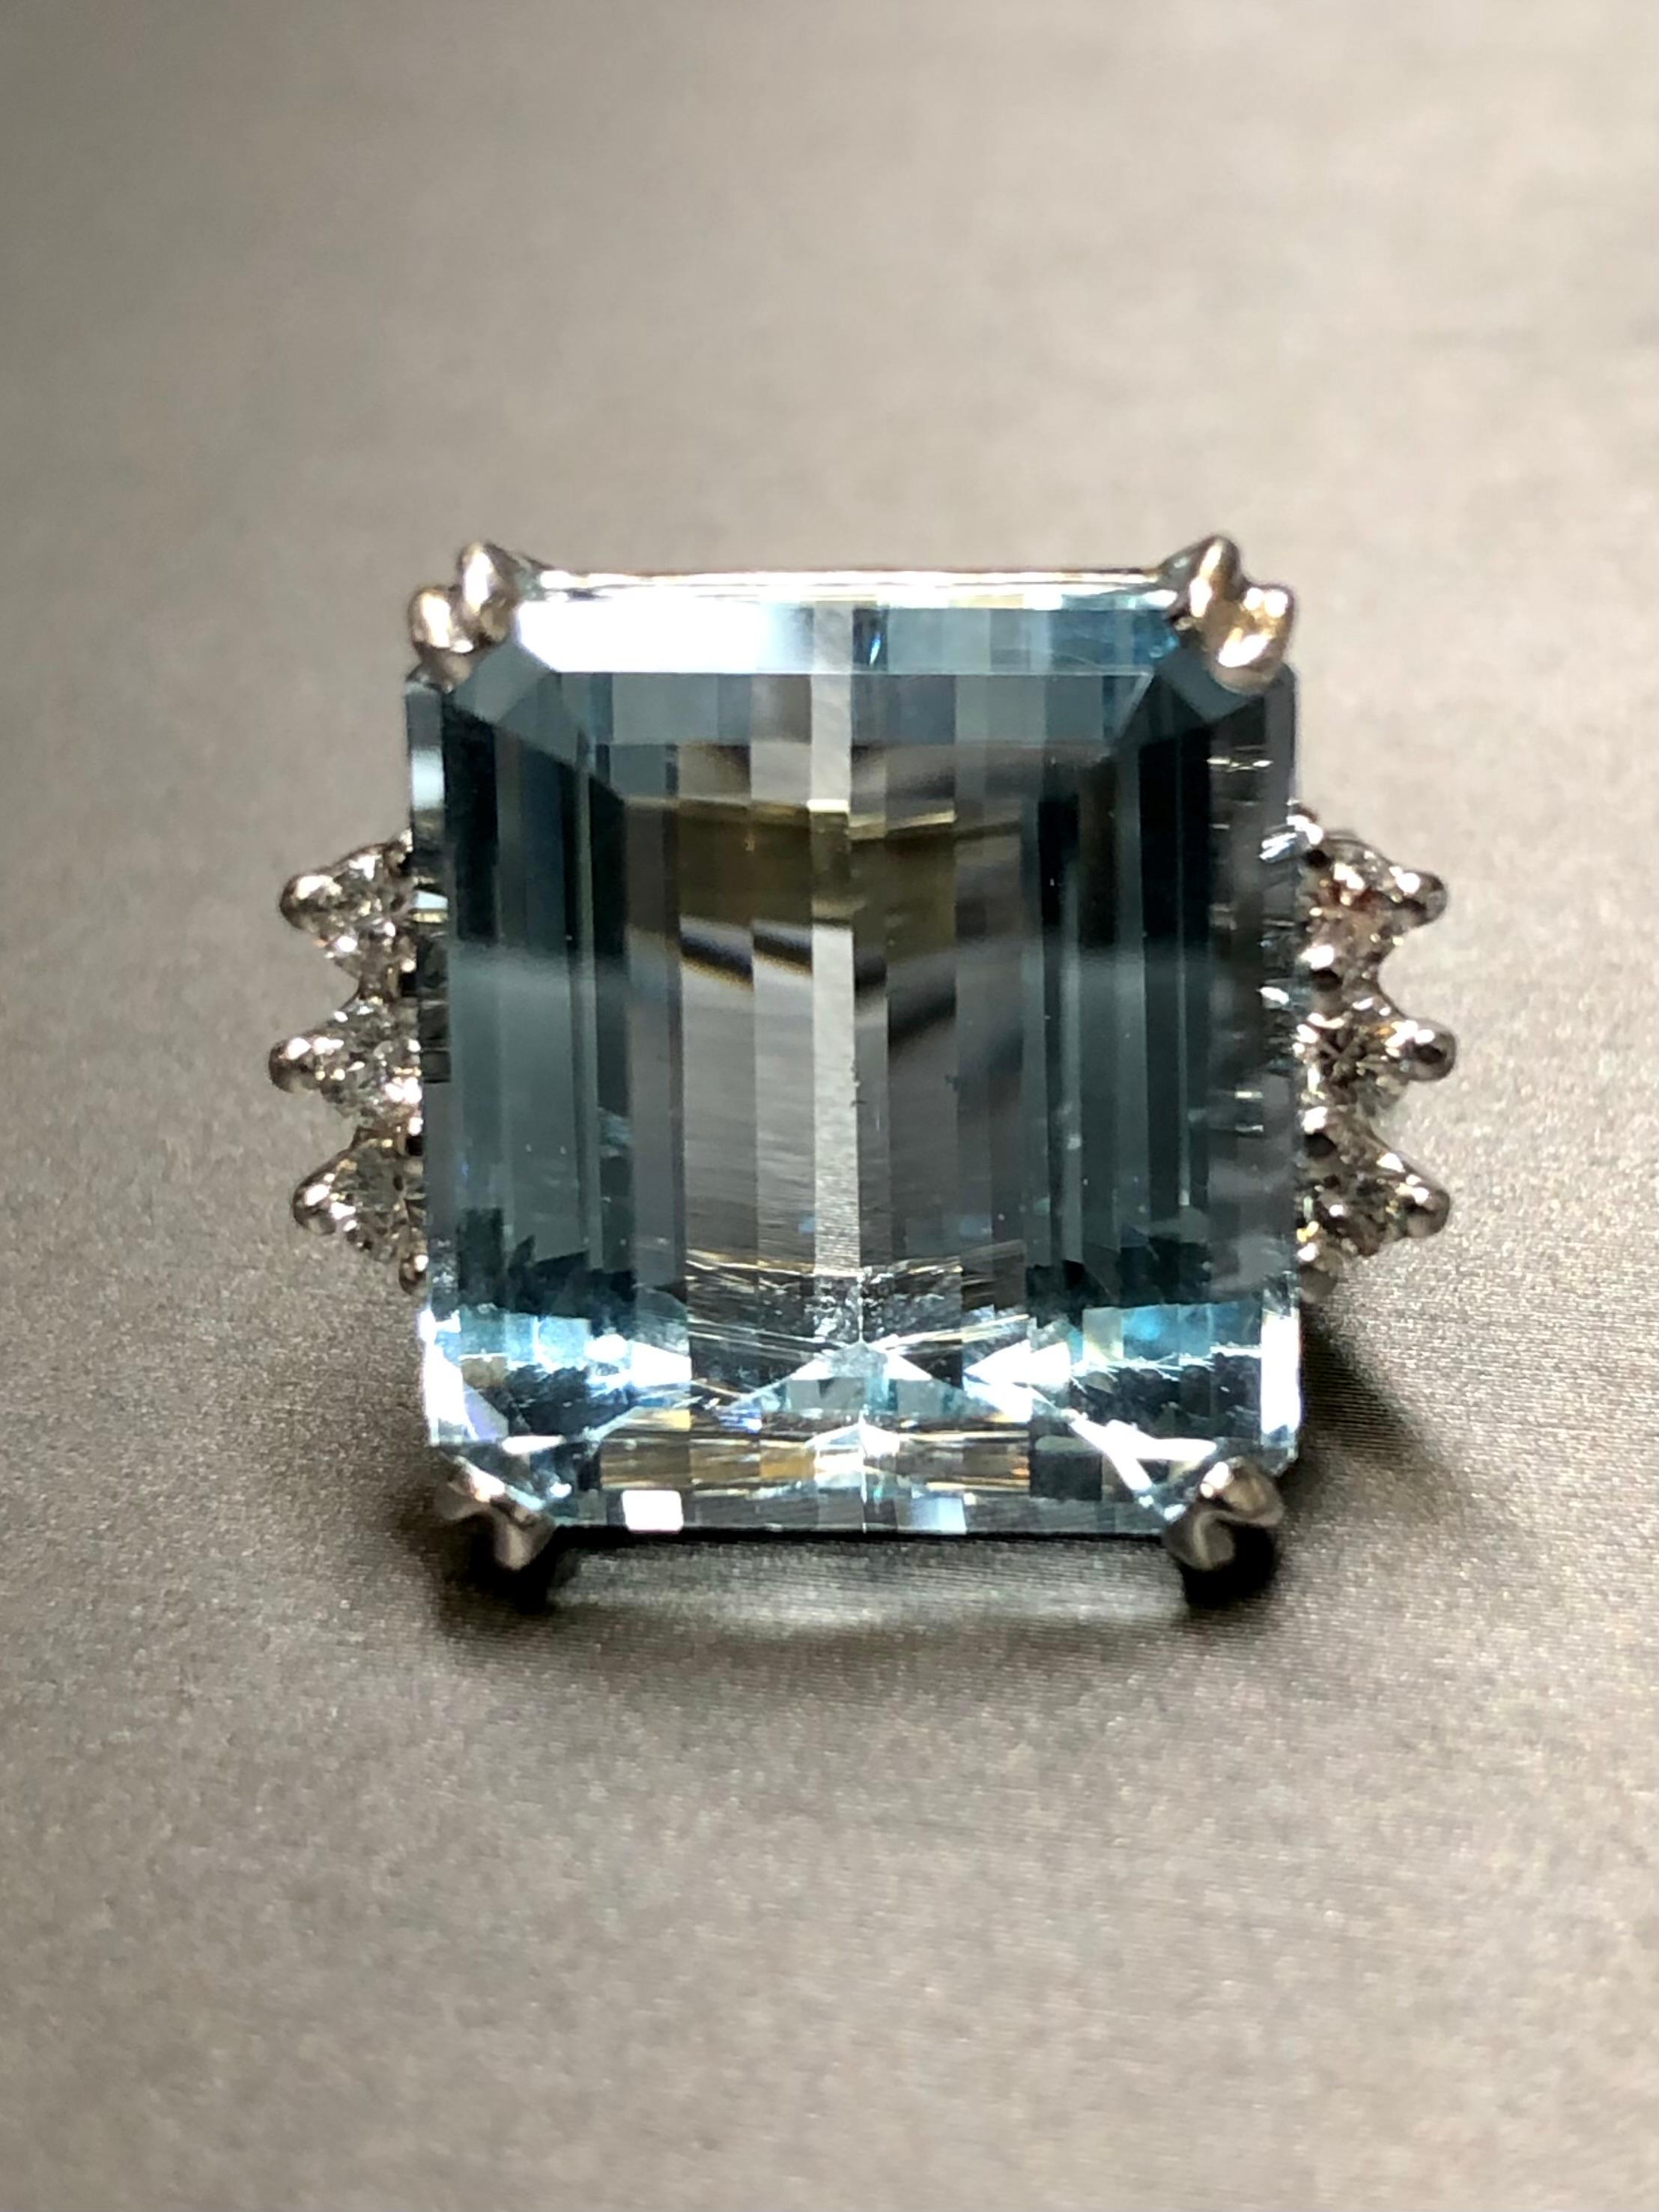 A stunning vintage cocktail ring done in 18K white gold and centered by an approximately 20ct natural deep blue aquamarine (17.55mm x 16.18mm x 10.45mm) of gorgeous cut quality and proportions; a very lively stone. Flanking the center stone is